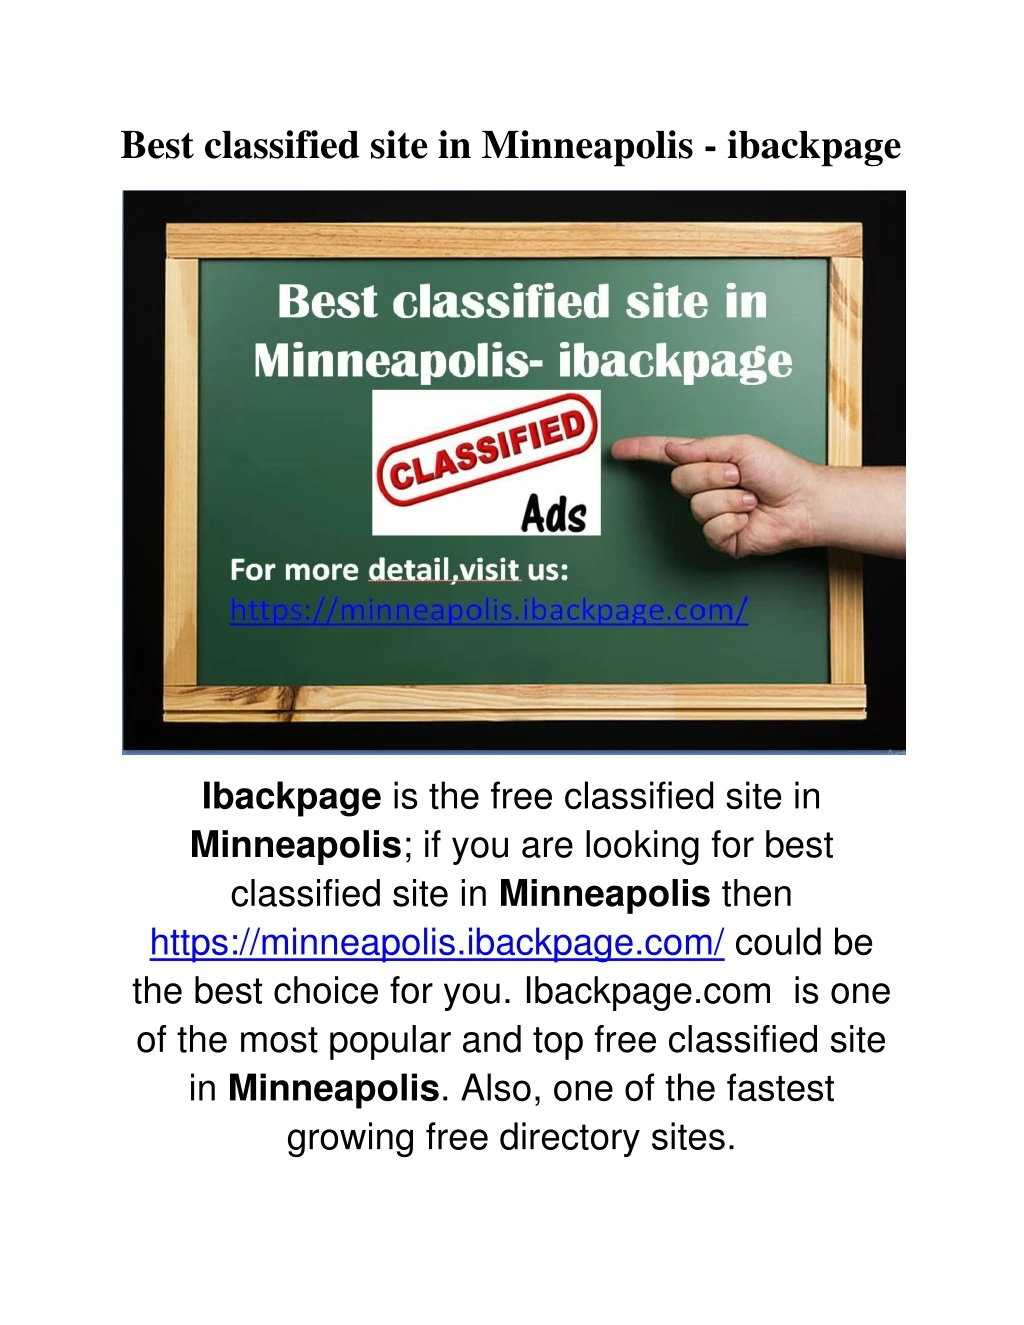 best classified site in minneapolis ibackpage